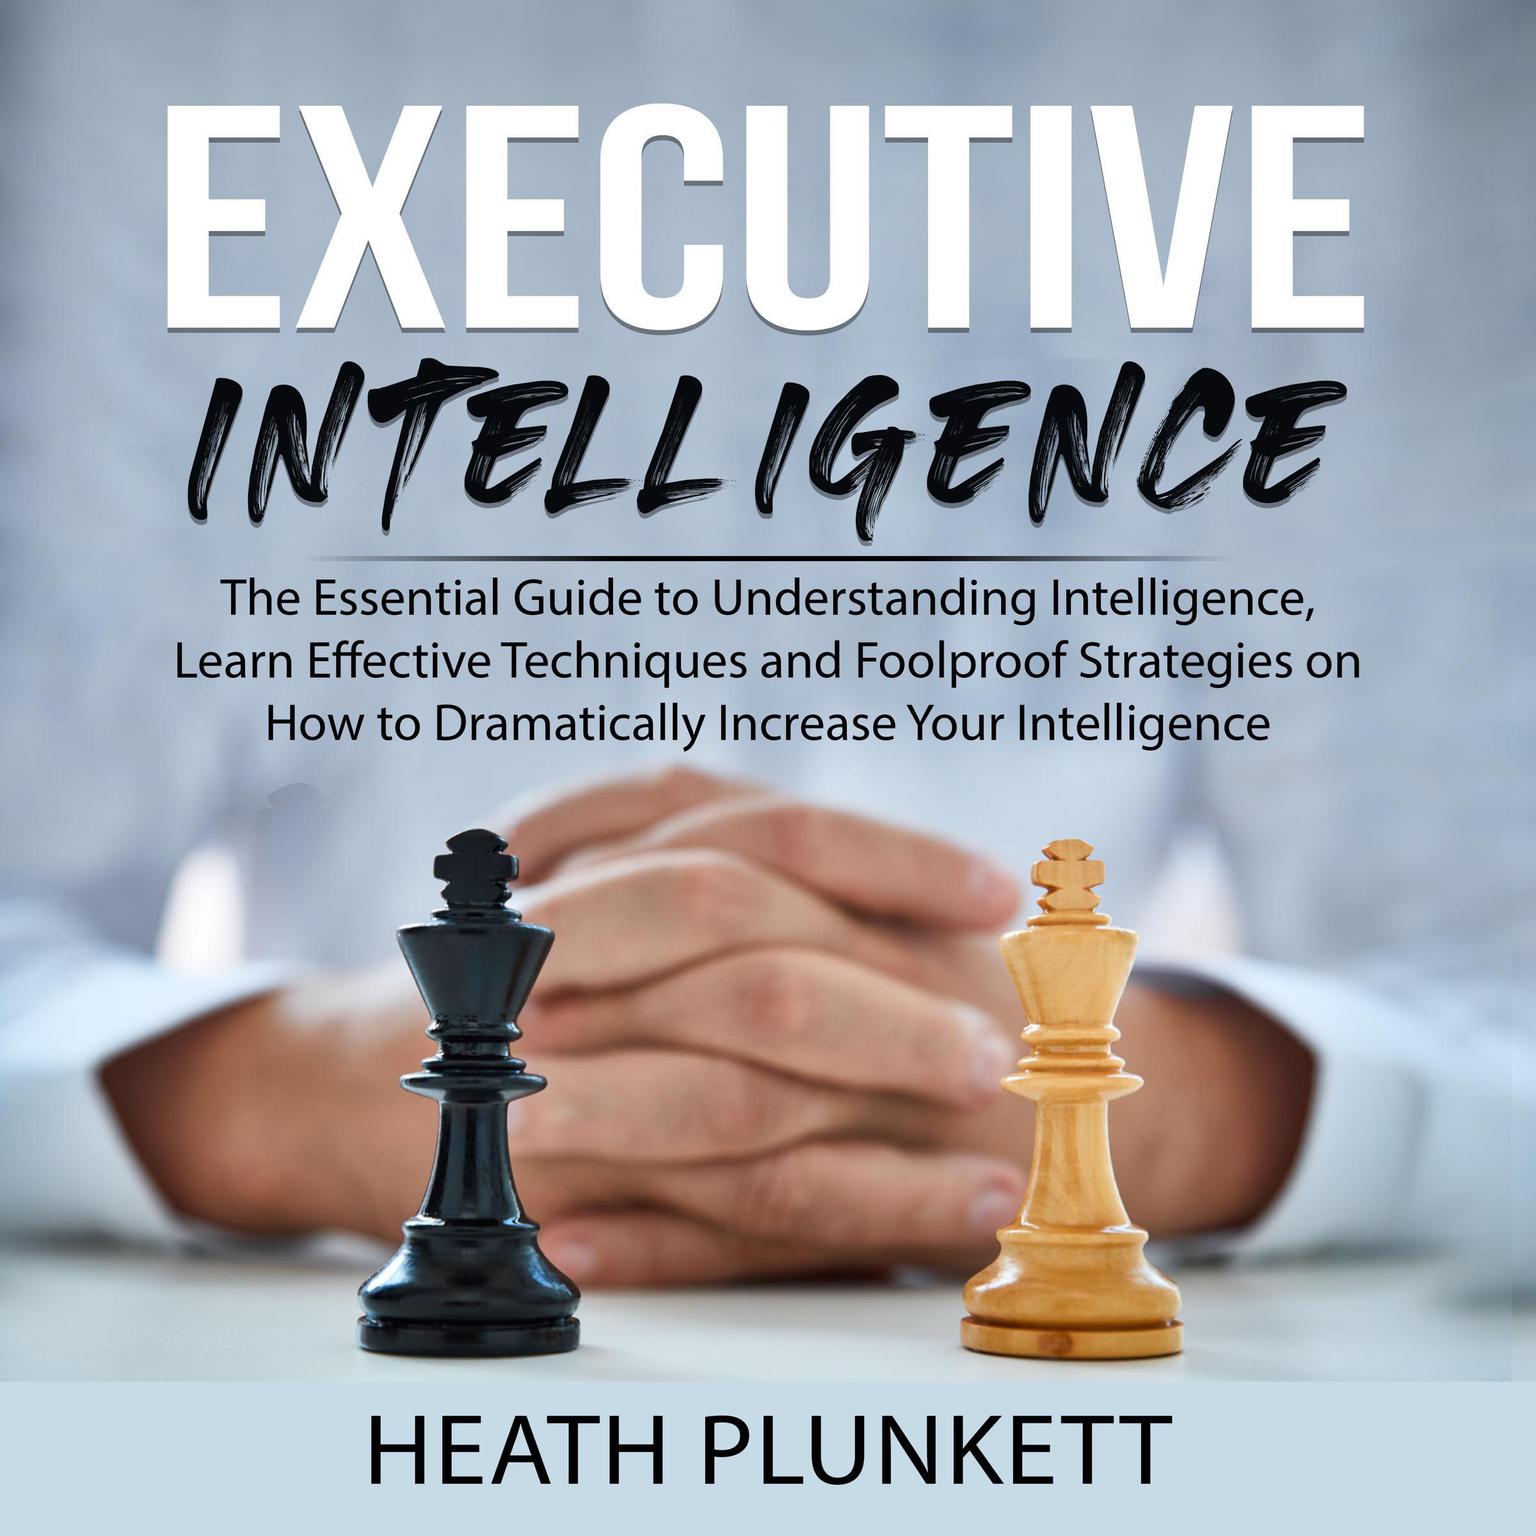 Executive Intelligence: The Essential Guide to Understanding Intelligence, Learn Effective Techniques and Foolproof Strategies on How to Dramatically Increase Your Intelligence Audiobook, by Heath Plunkett